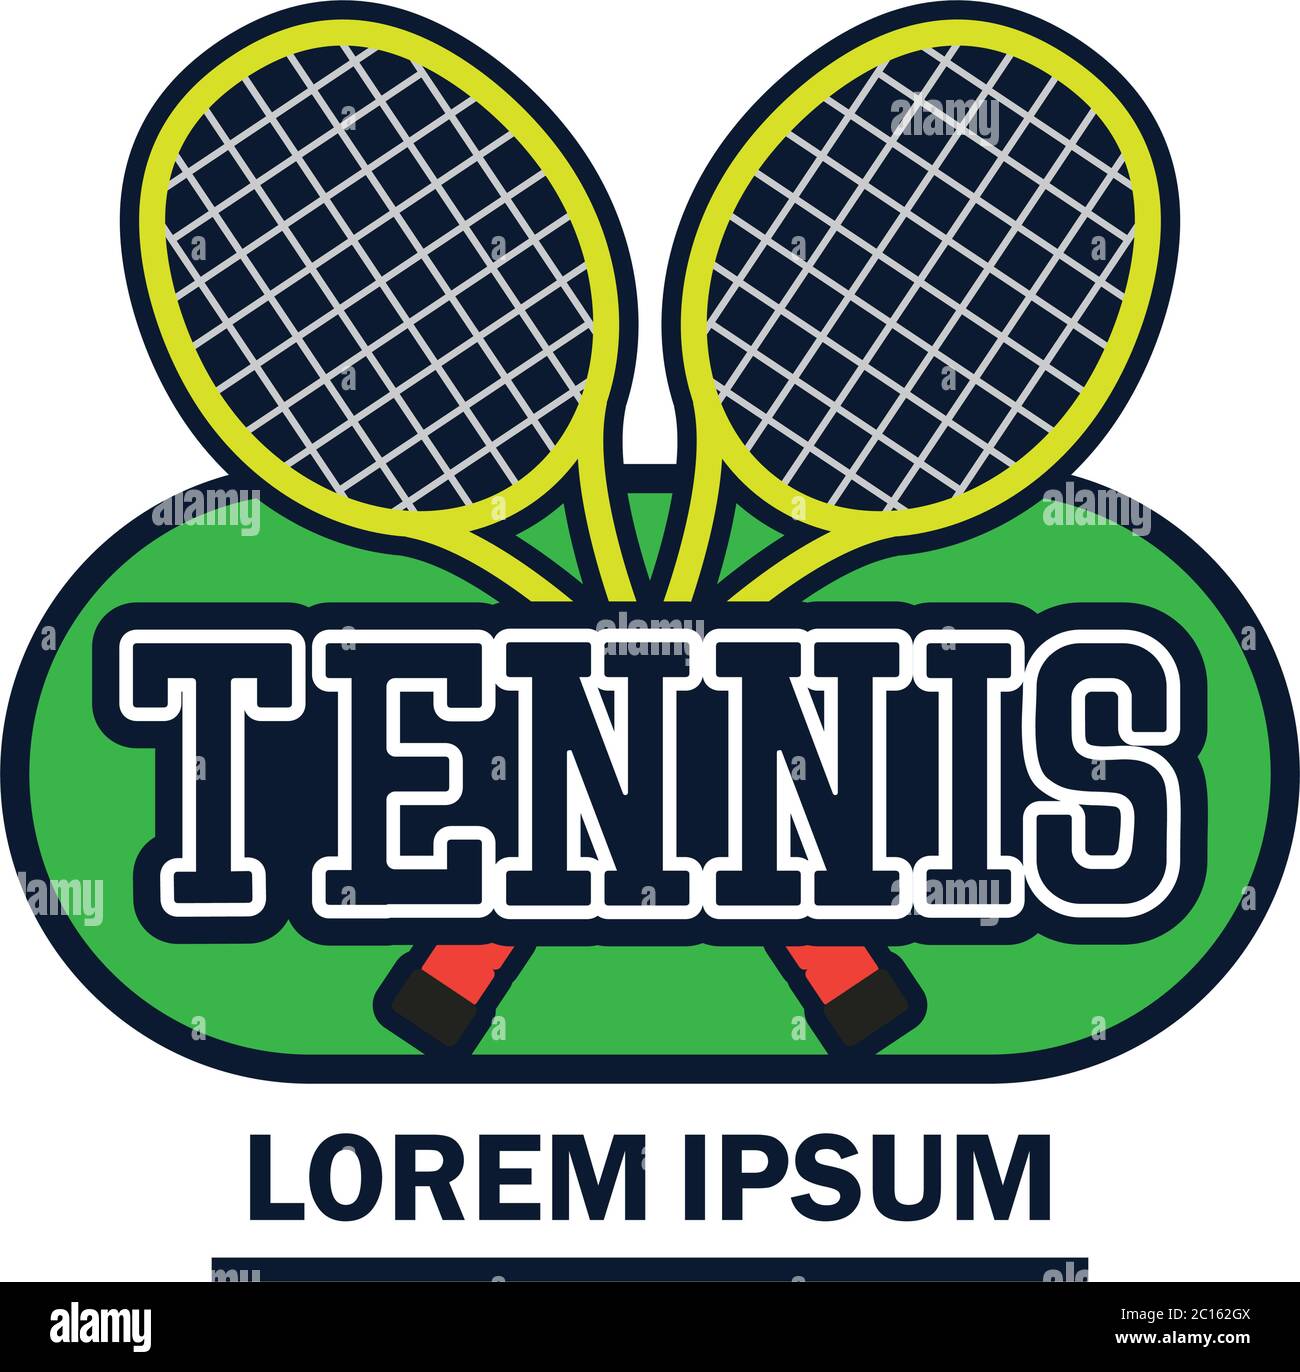 tennis court logo with text space for your slogan / tag line, vector illustration Stock Vector